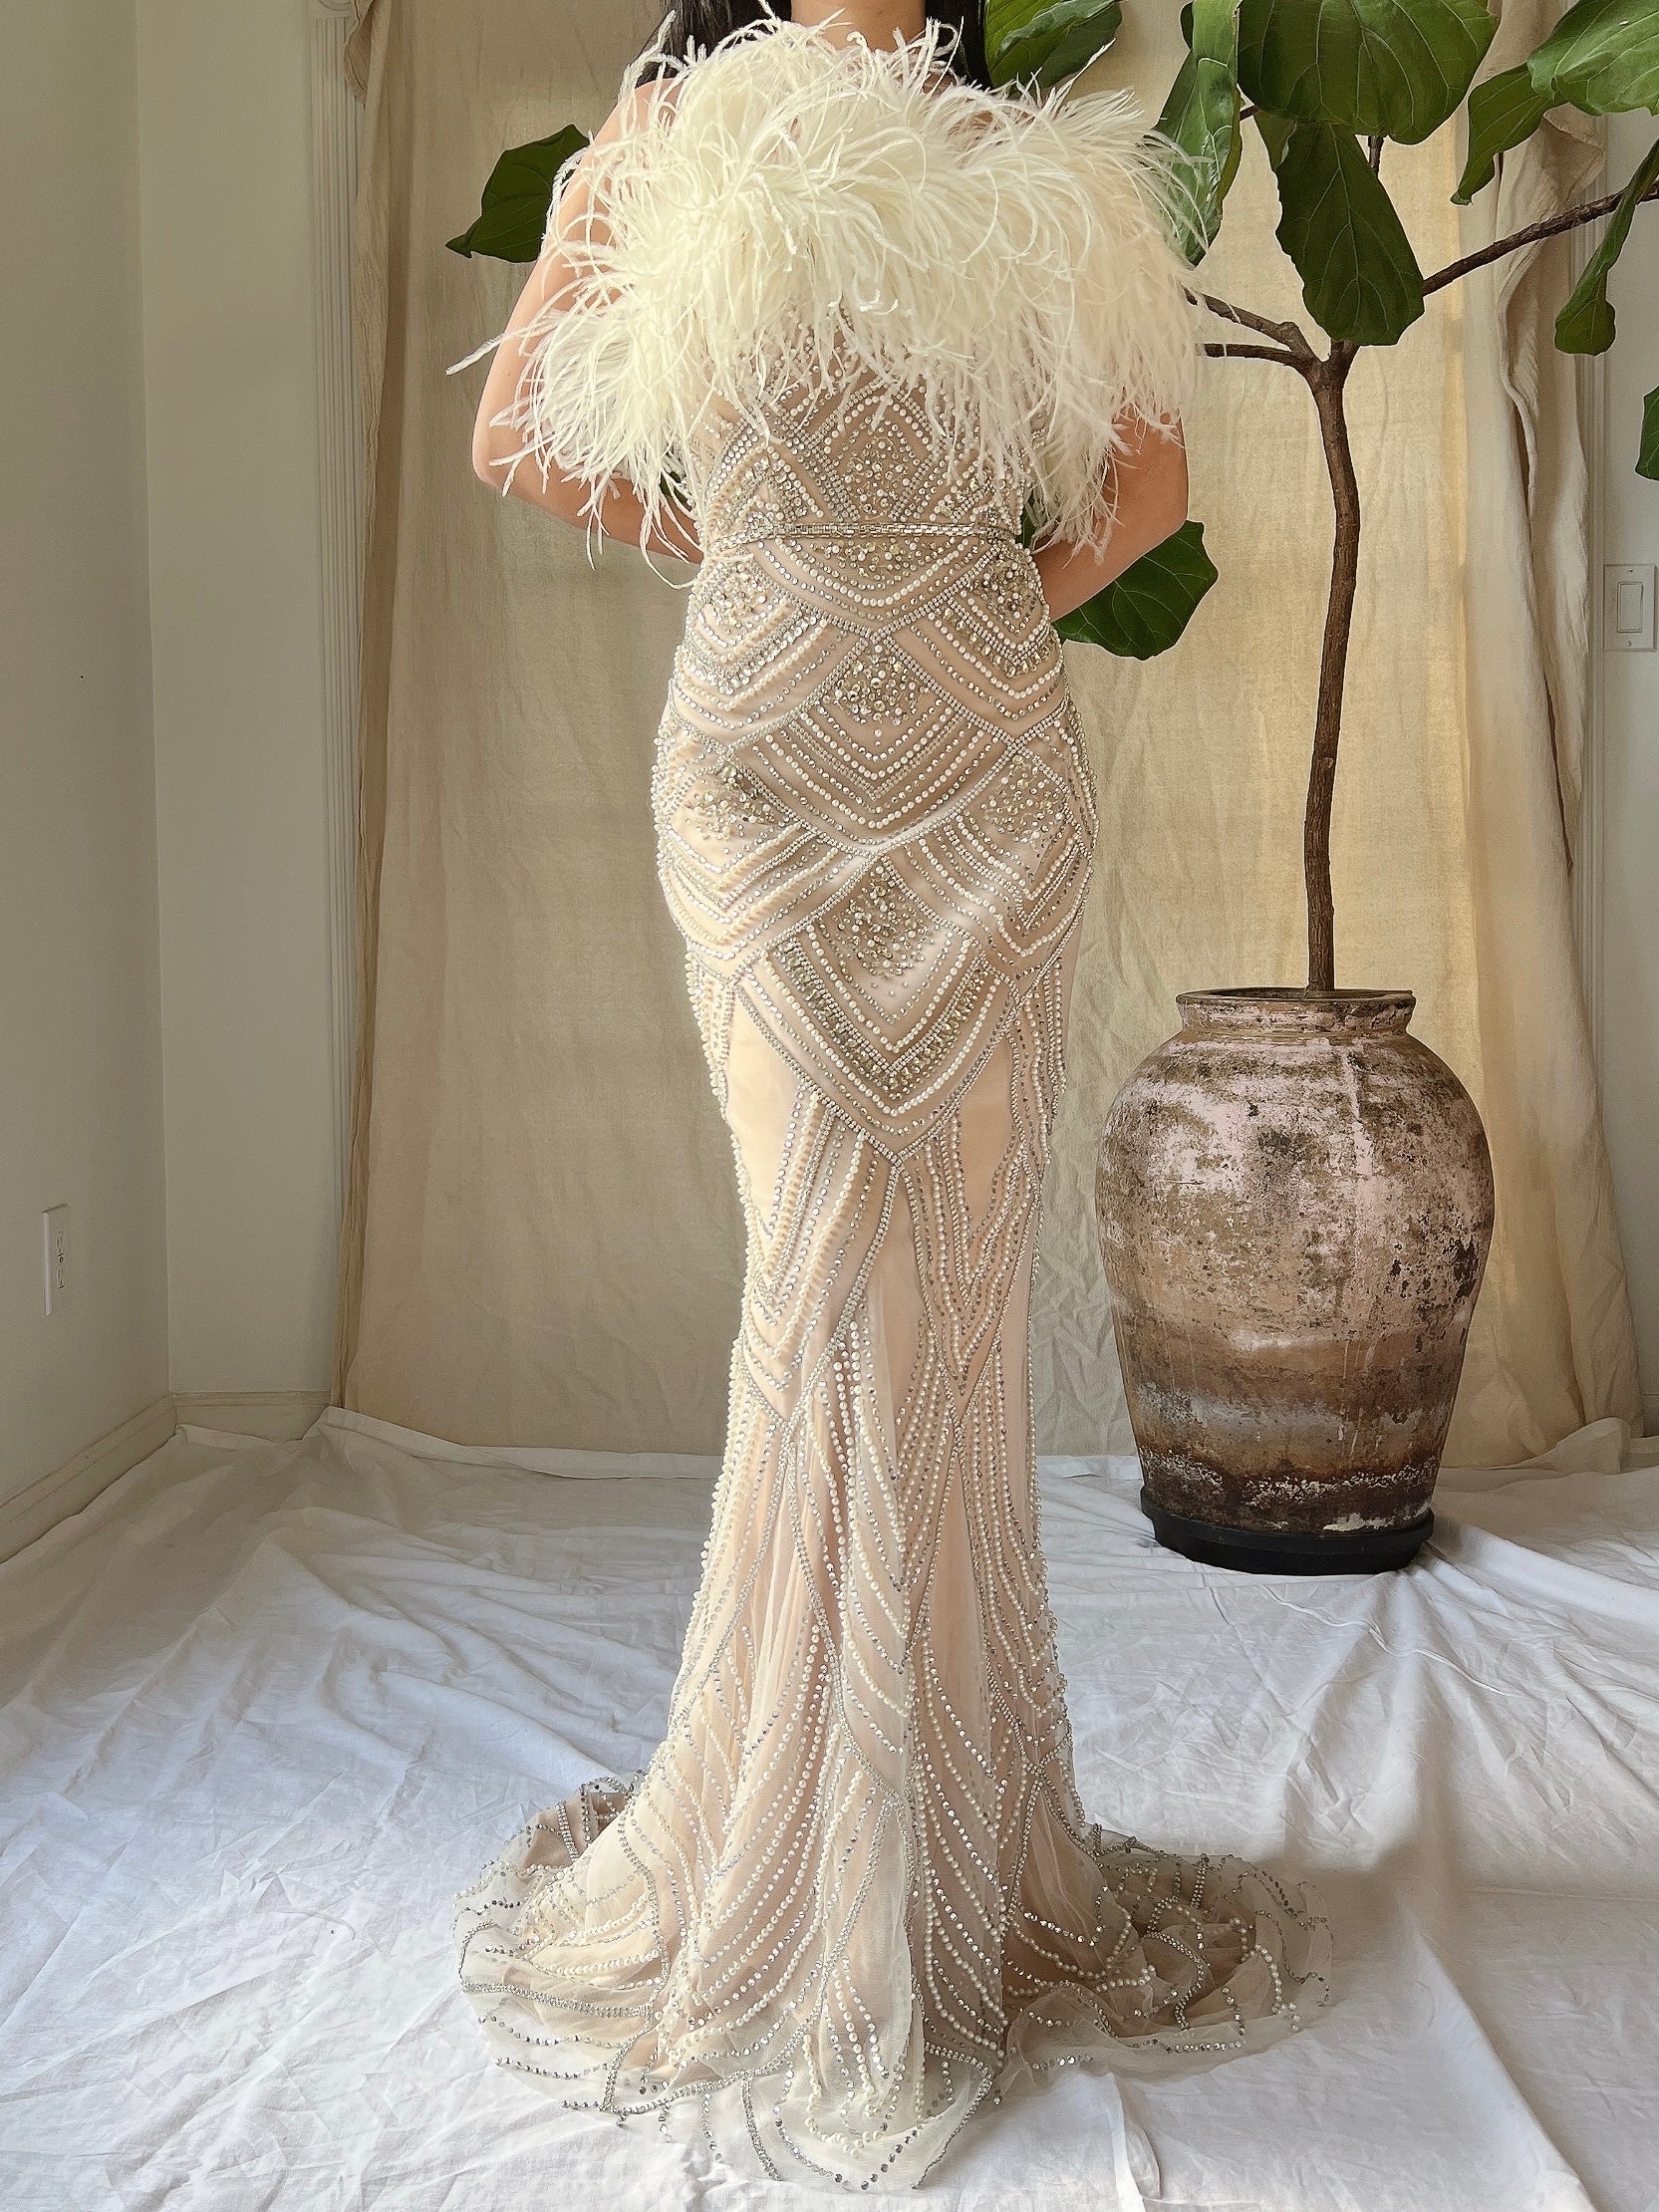 1990s Crystals Ivory/Nude Gown with Feathers - XS